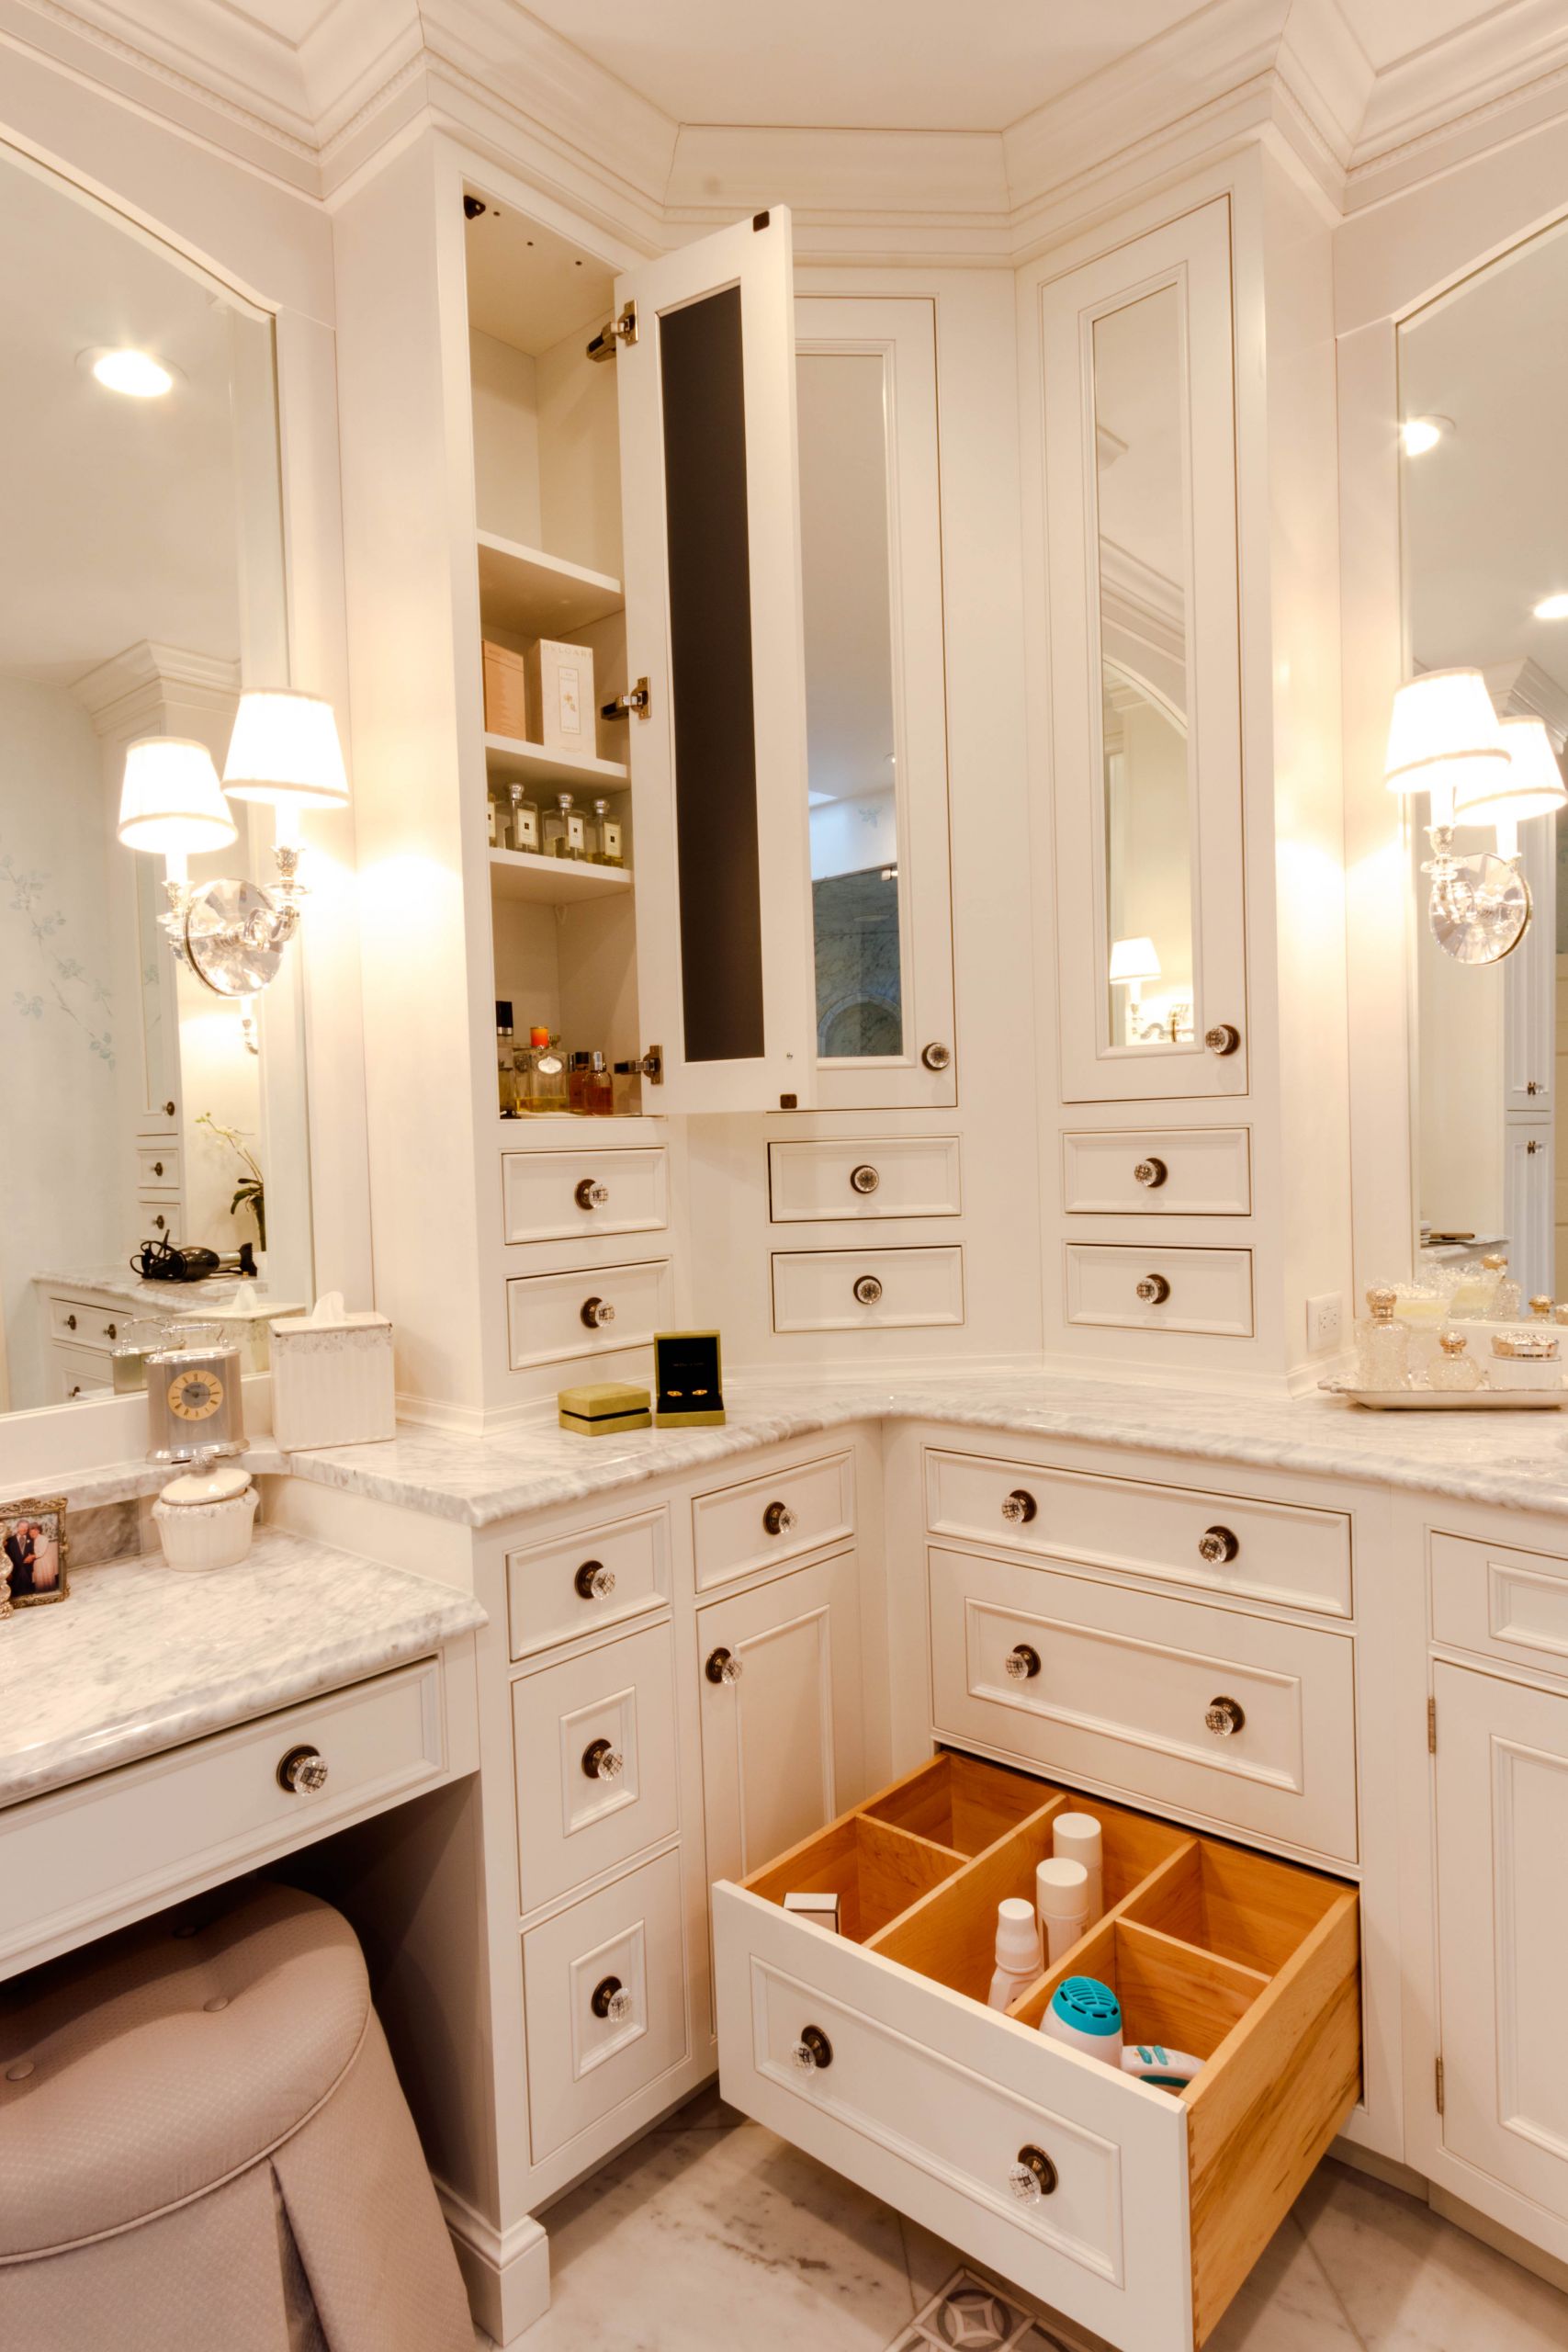 Master Bathroom With Closet
 How to create hidden storage in a master bath suite